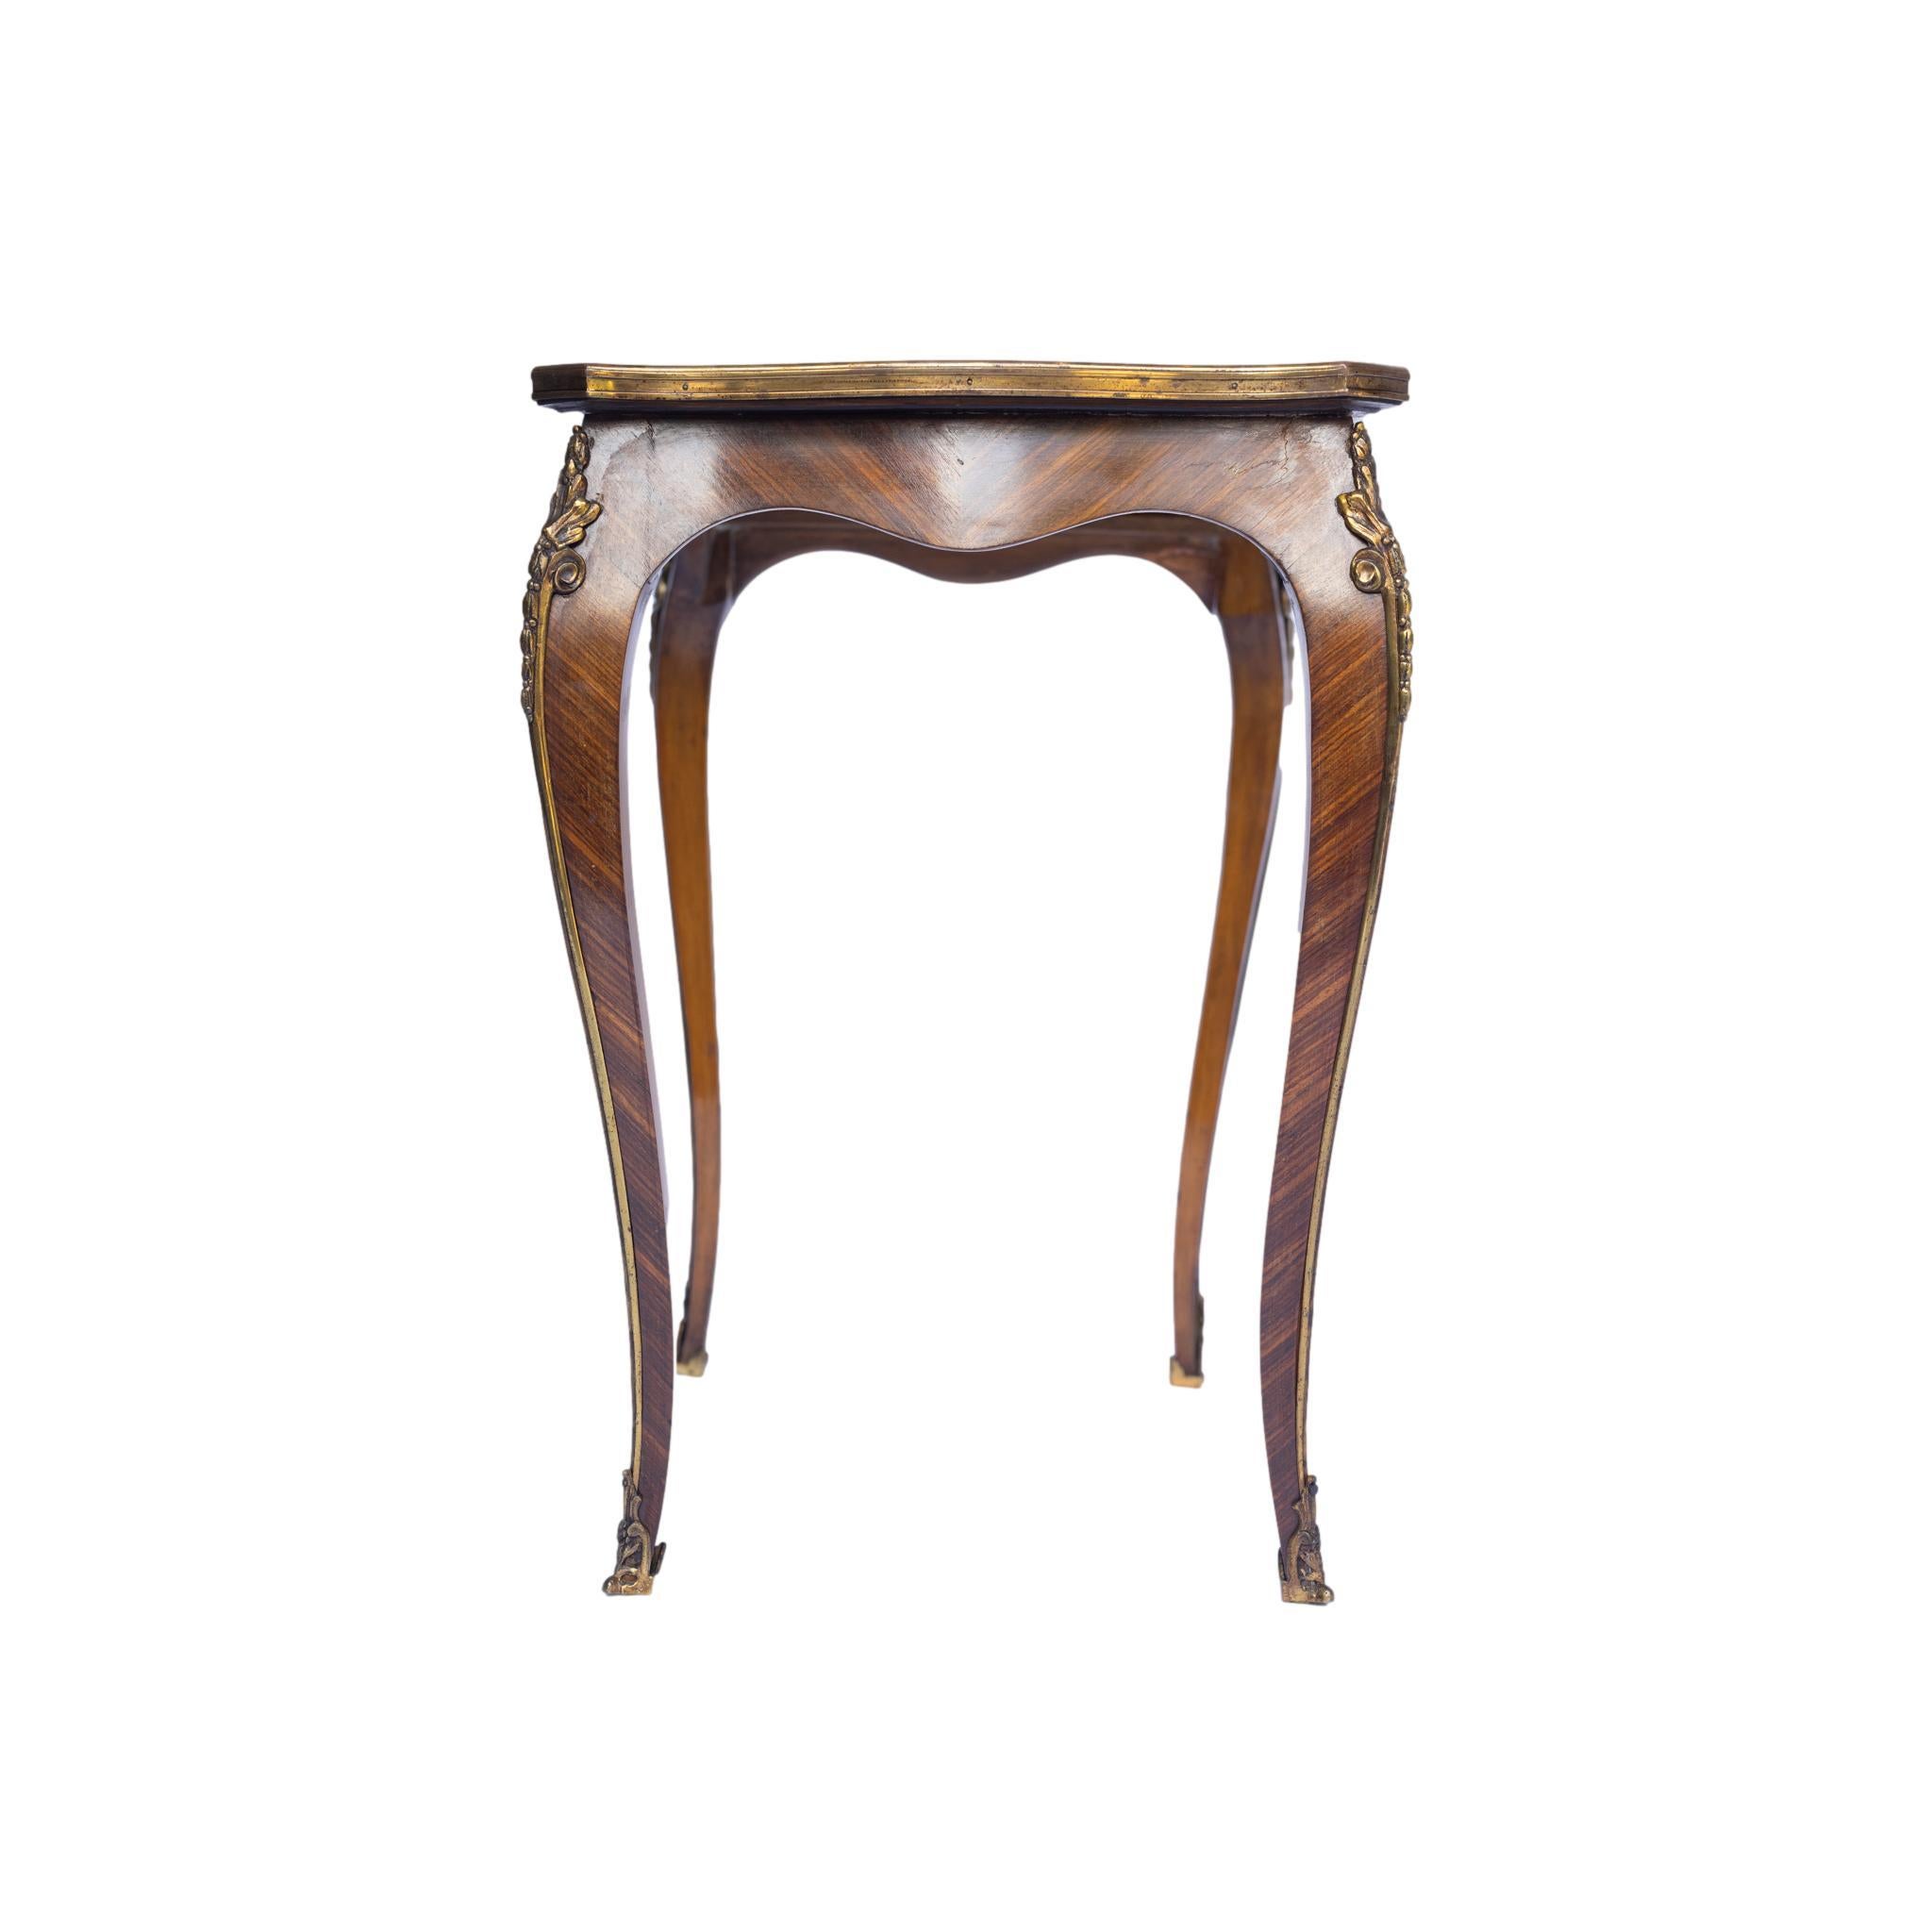 Set Three Louis XV-Style Kingwood and Parquetry Nesting Tables, French, c. 1880 For Sale 2